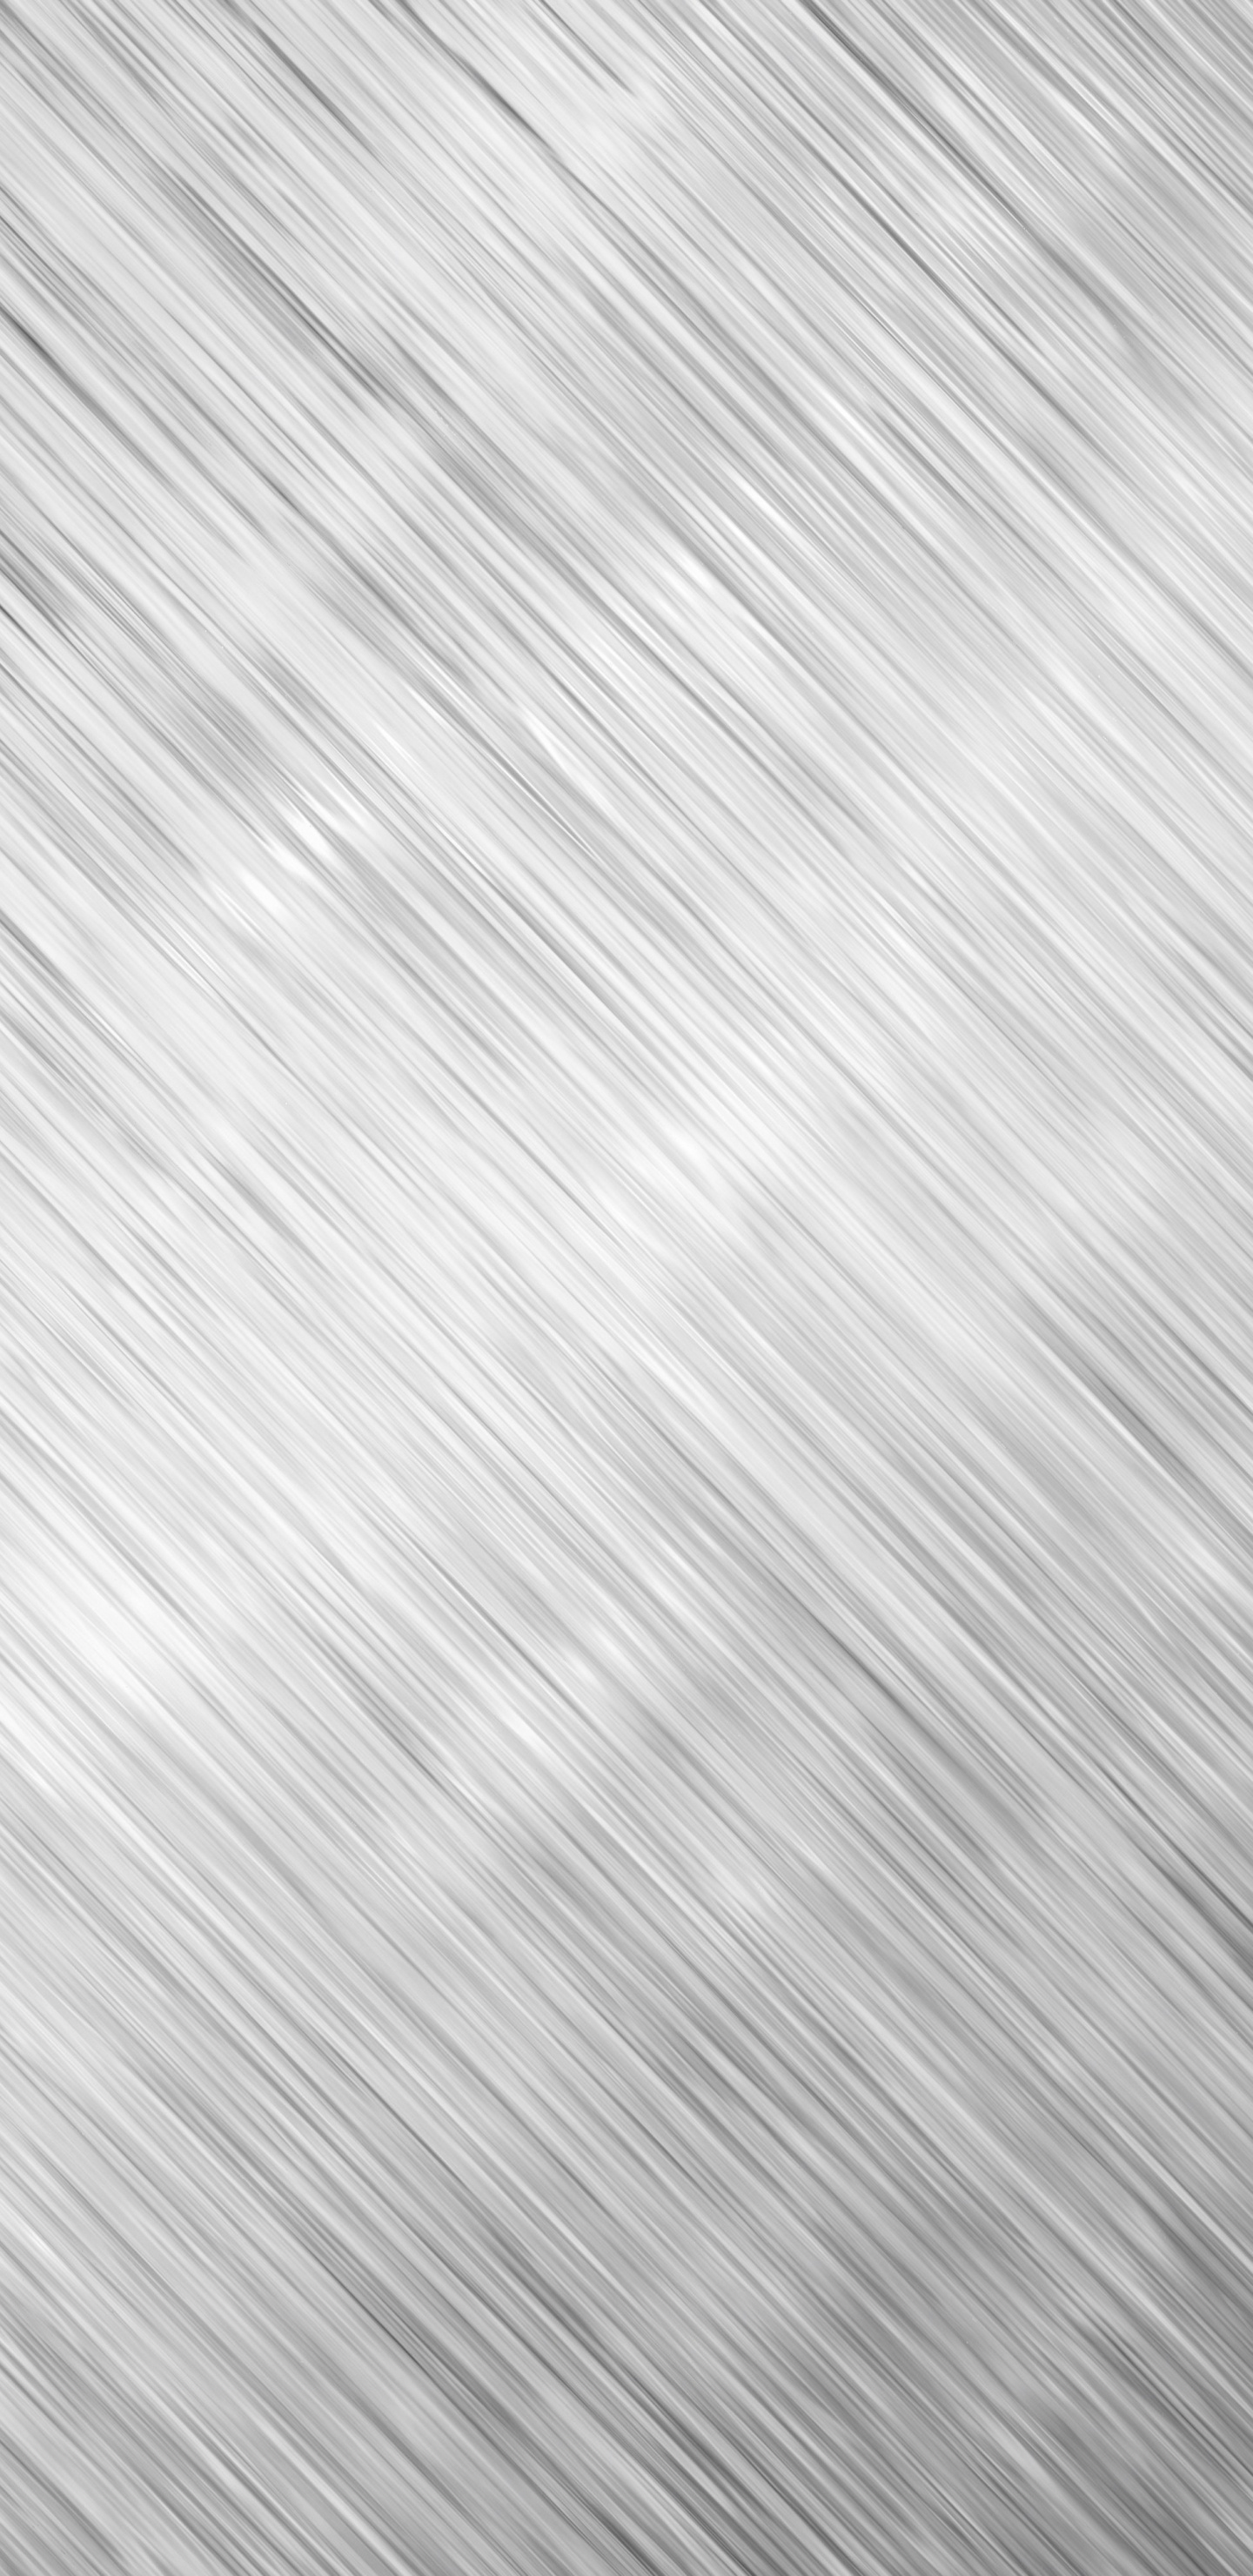 Grey and White Striped Textile. Wallpaper in 1440x2960 Resolution